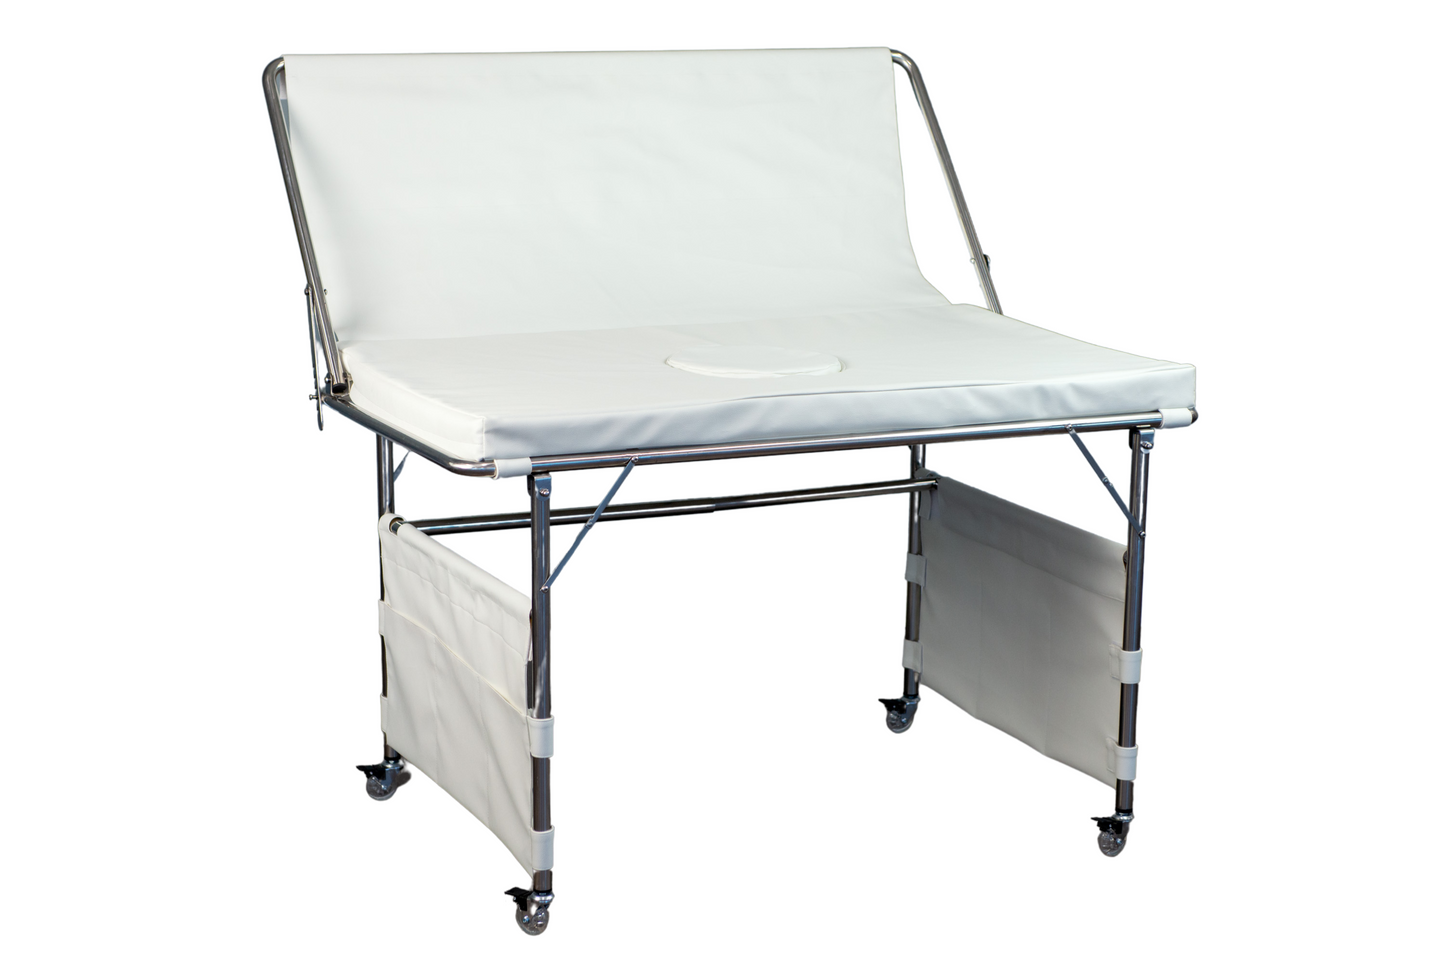 Stainless steel newborn photography posing table that folds flat for easy storage, ideal for baby photographers